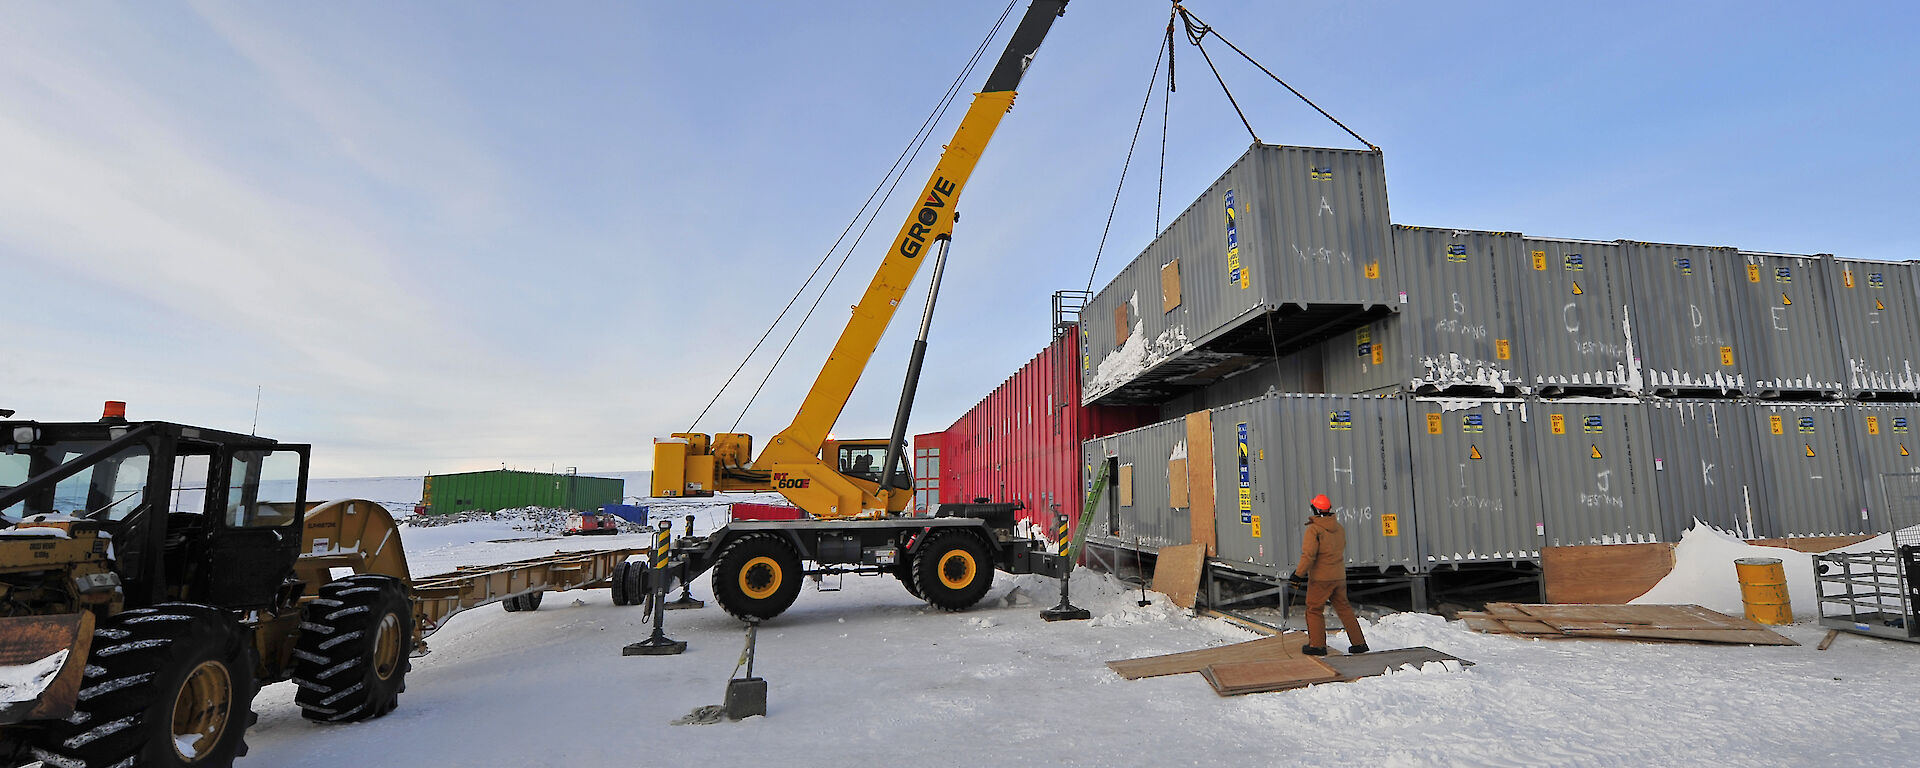 A tall crane moves a shipping container from a stack of them.